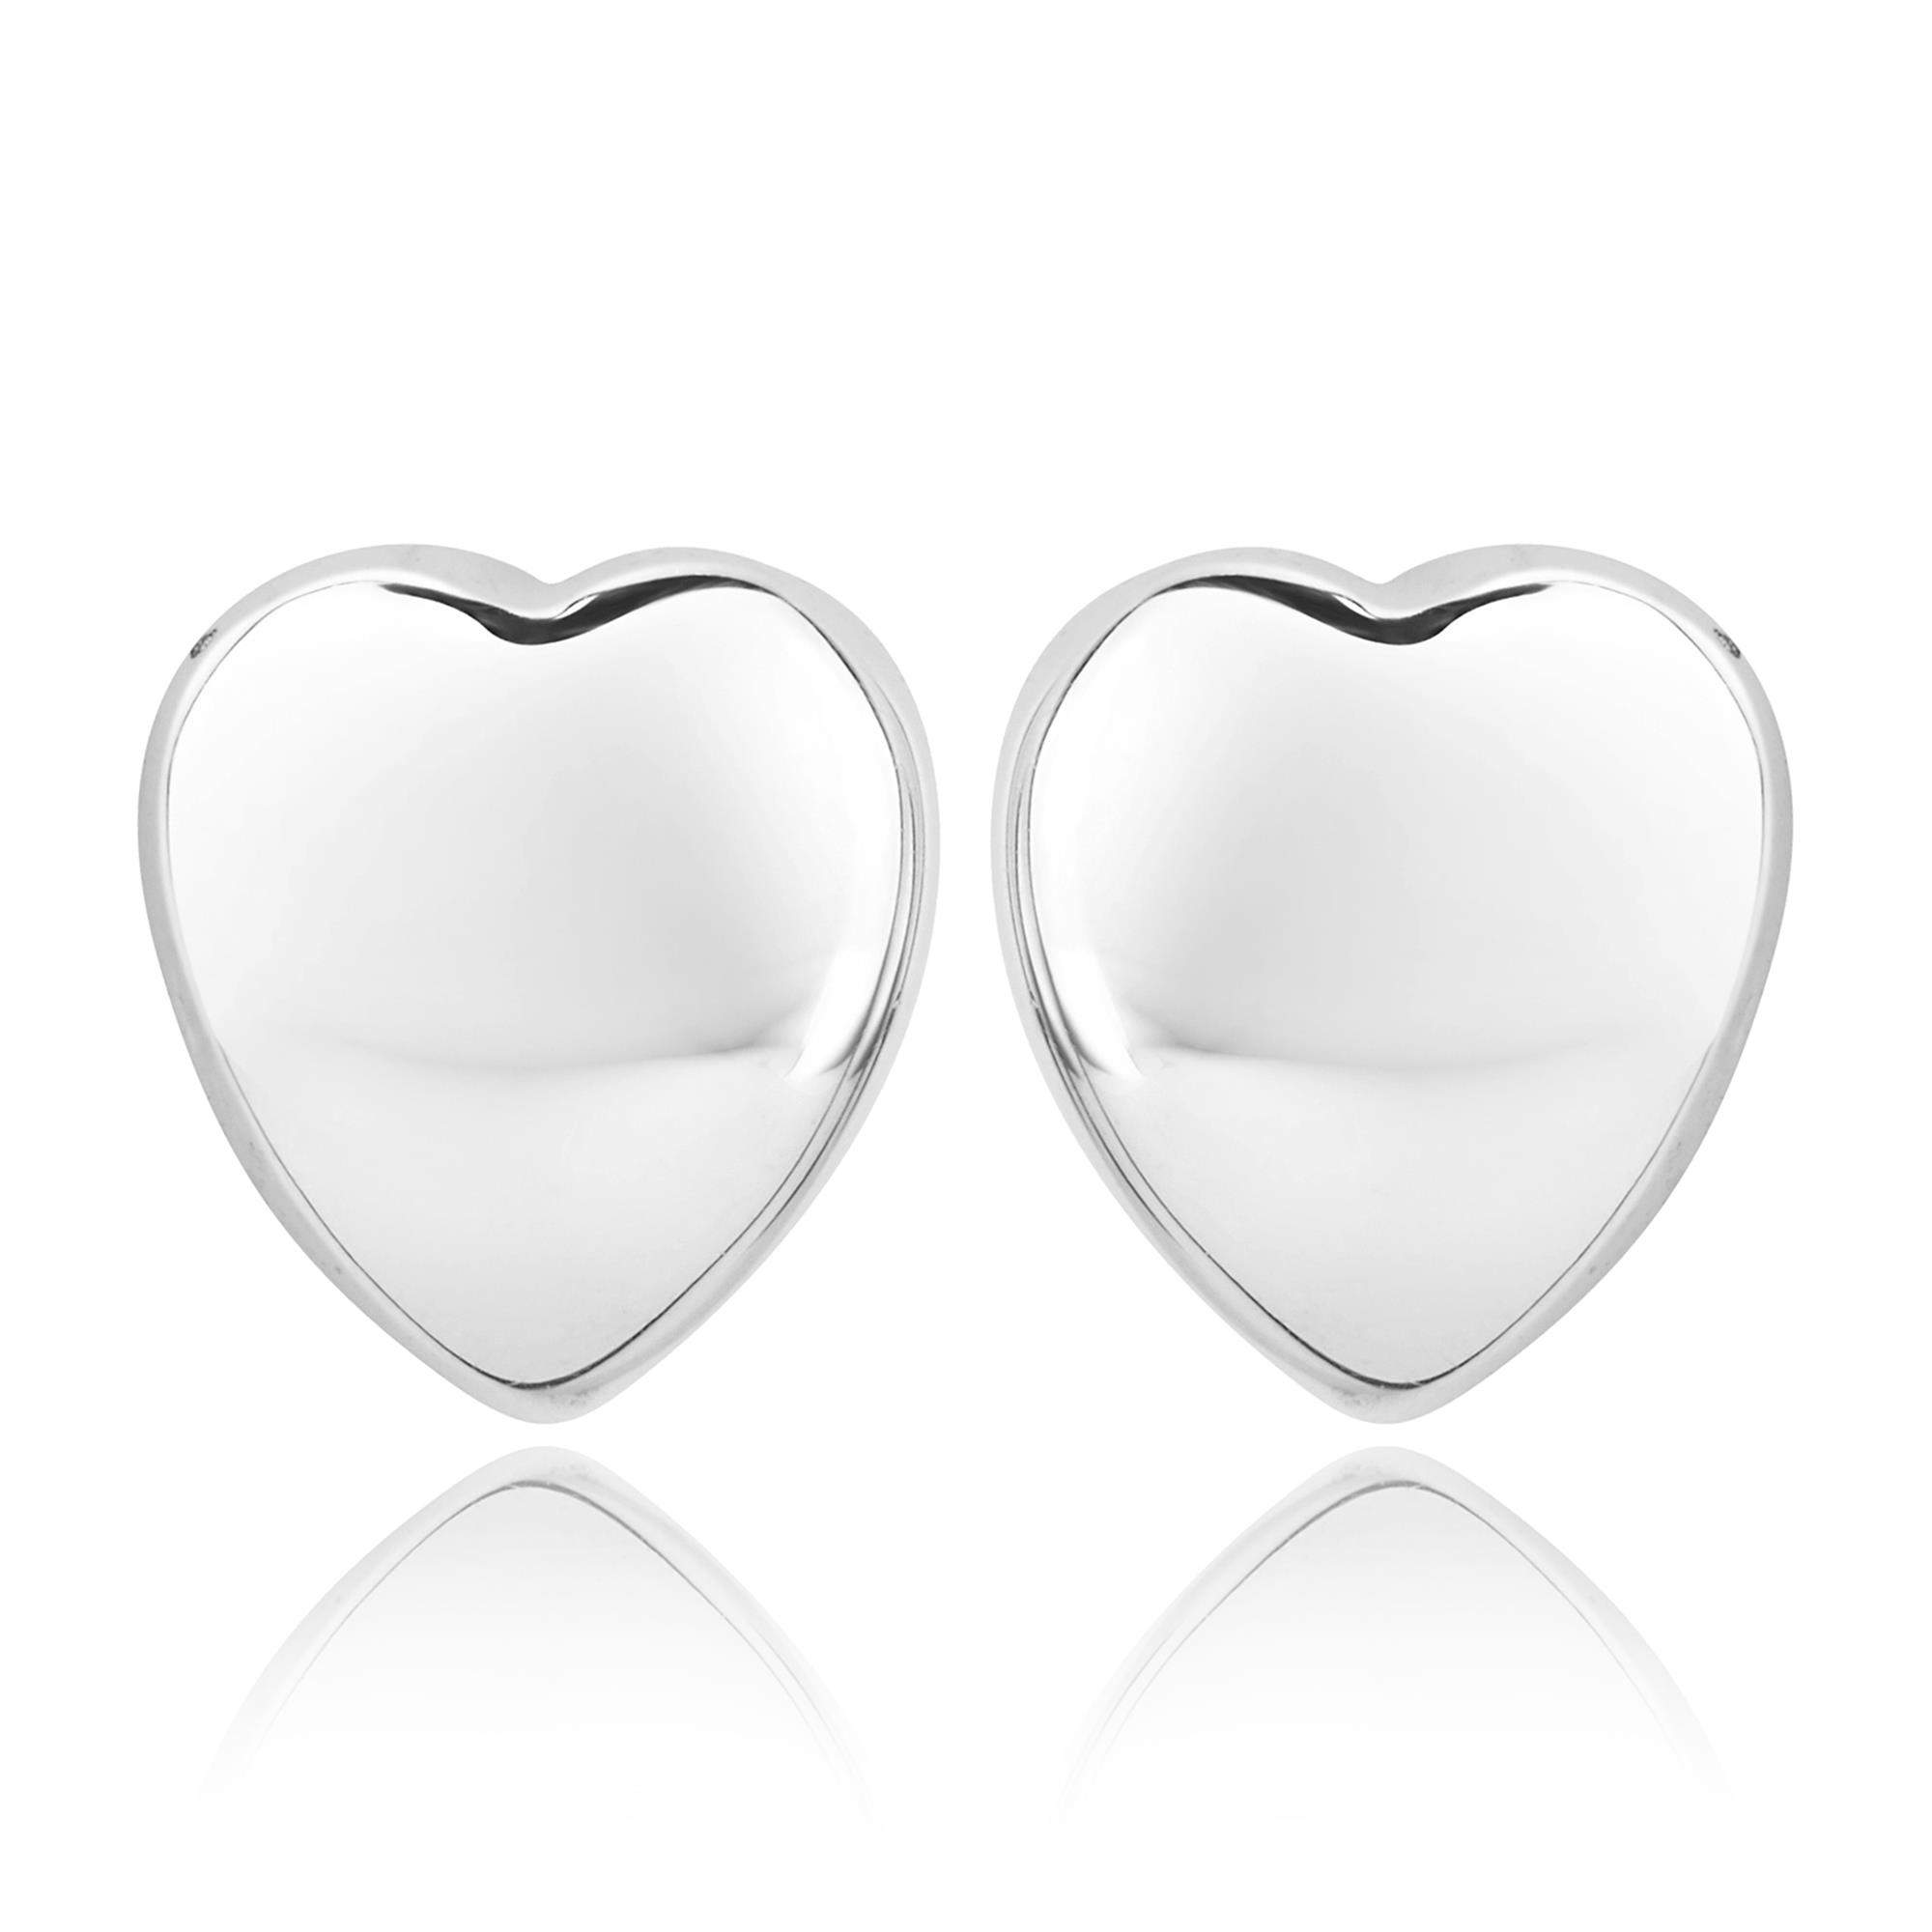 18ct White Gold Small Heart Stud Earrings | Pravins Jewellers